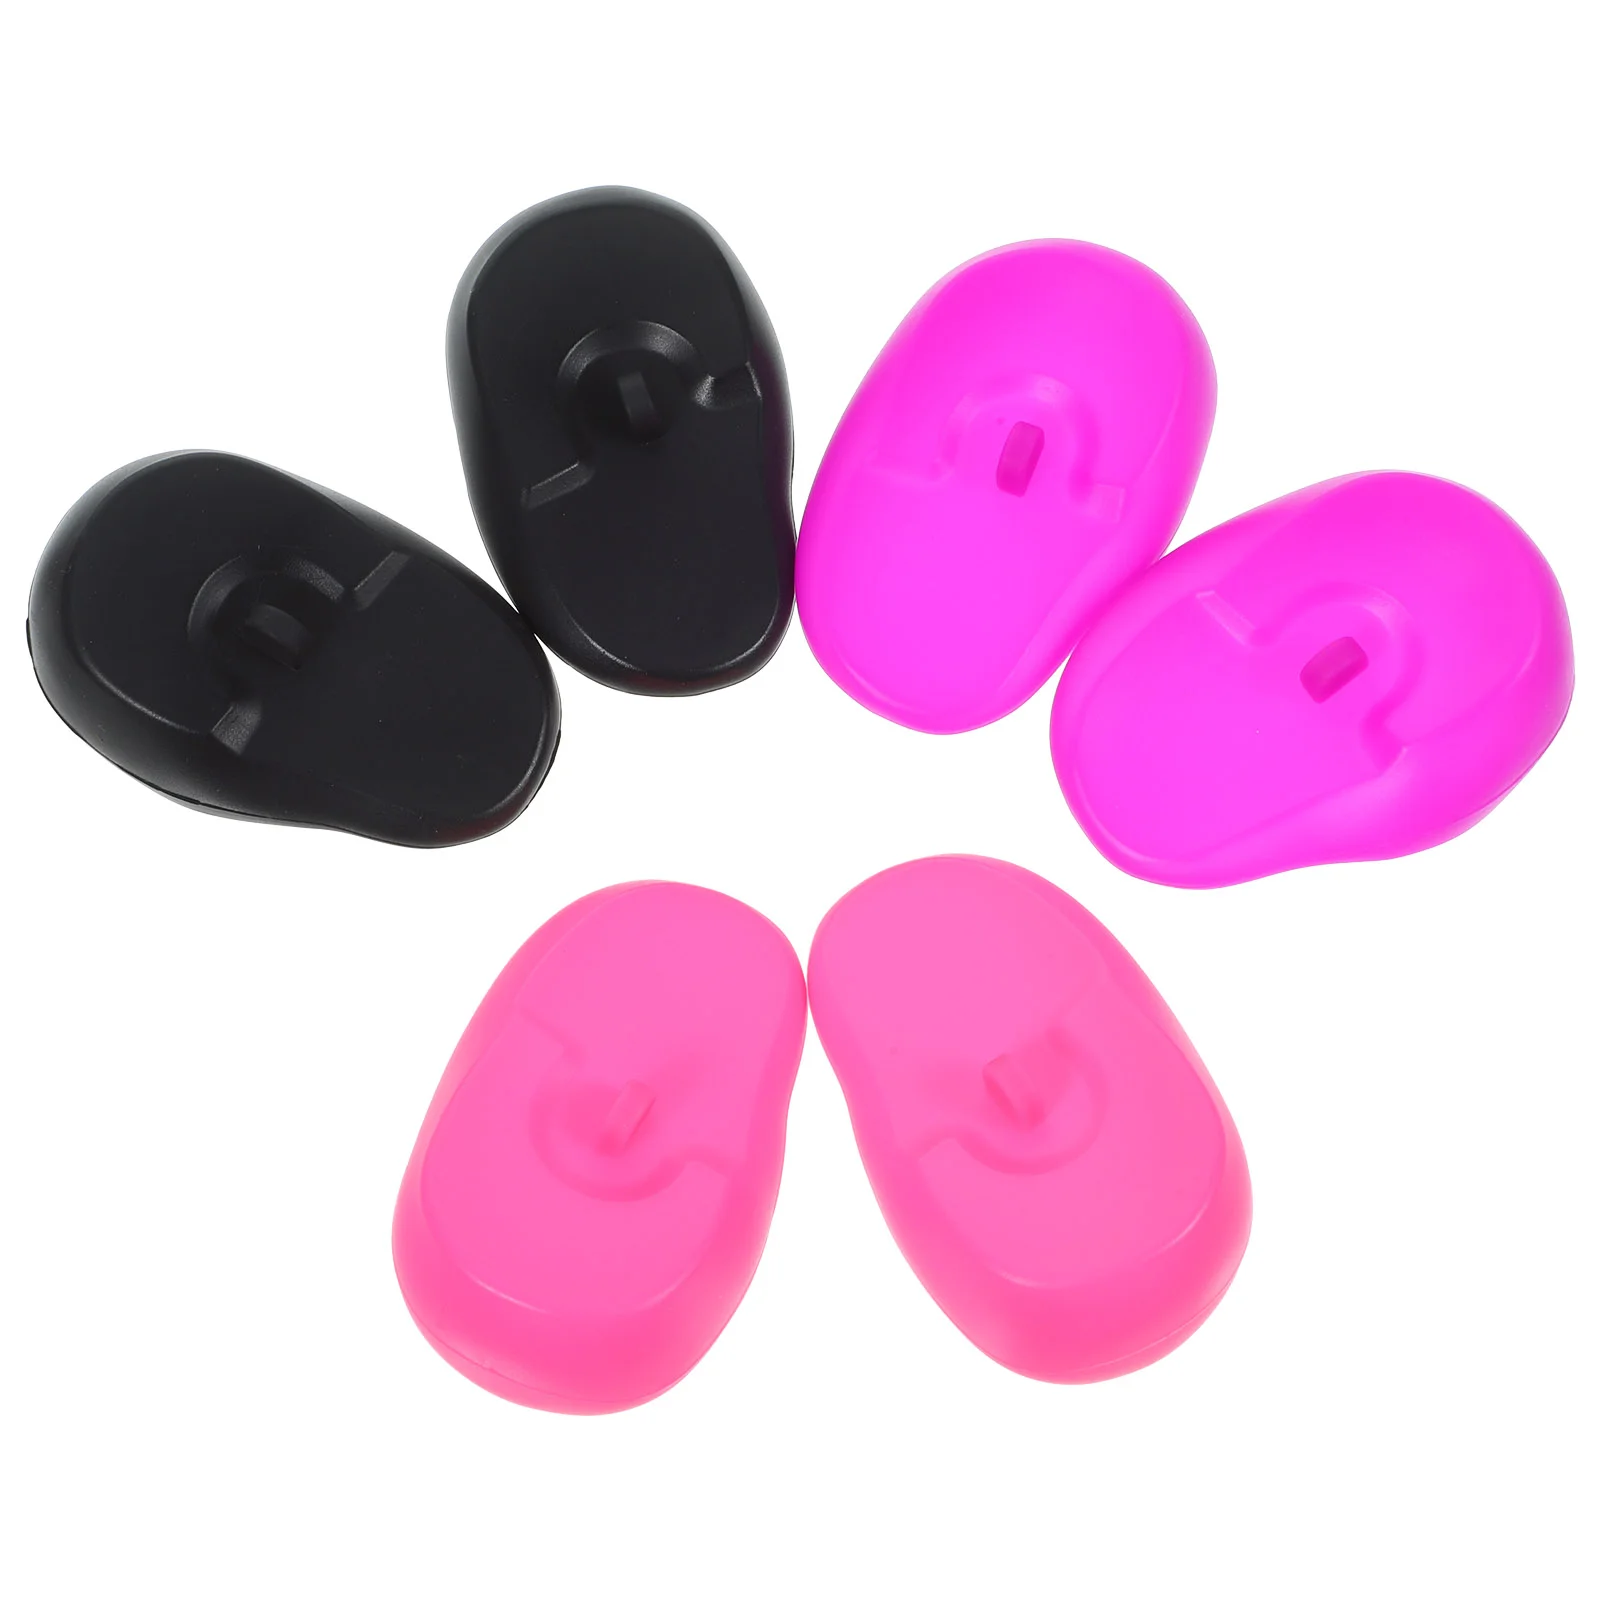 

Ear Hair Cover Covers Dye Shower Caps Protector Silicone Salon Hairdressing Shield Cap Dryer Protectors Coloring Earmuffs